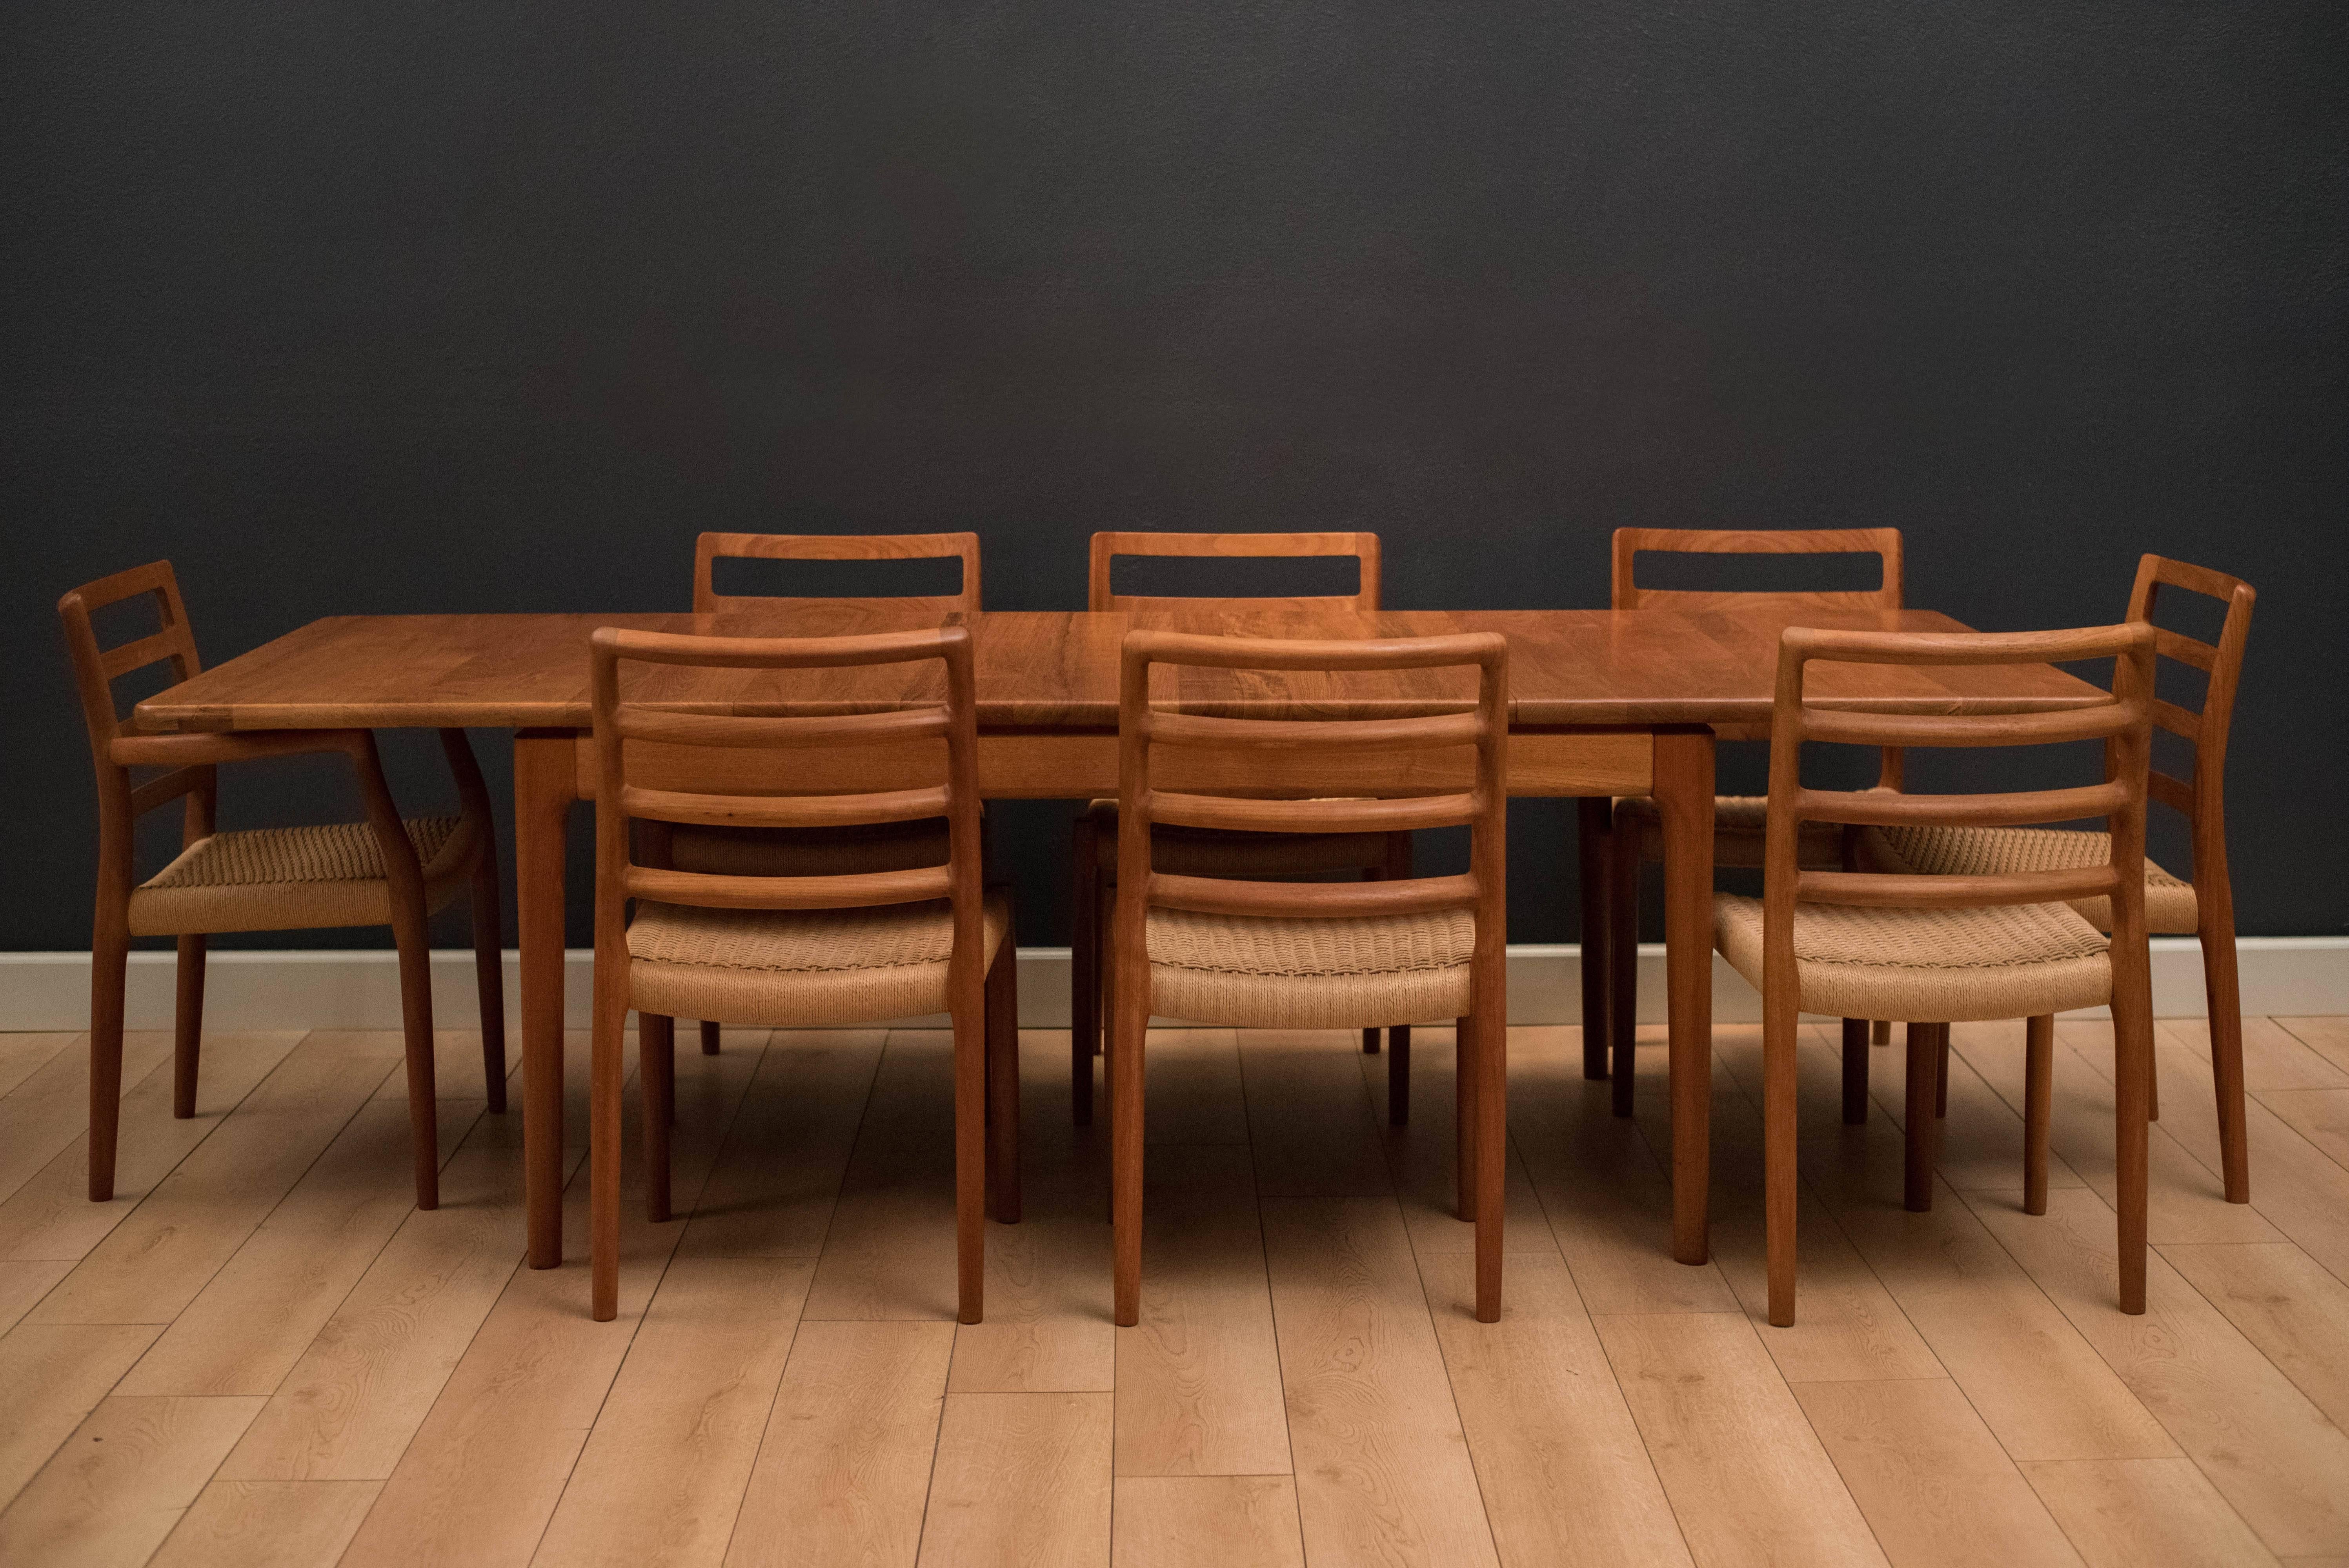 Mid-century Danish teak dining table by Glostrup Mobelfabrik. This piece is made of solid planked teak and can easily expand with one or two additional leaves that cleverly store underneath table.

Dimensions: 99